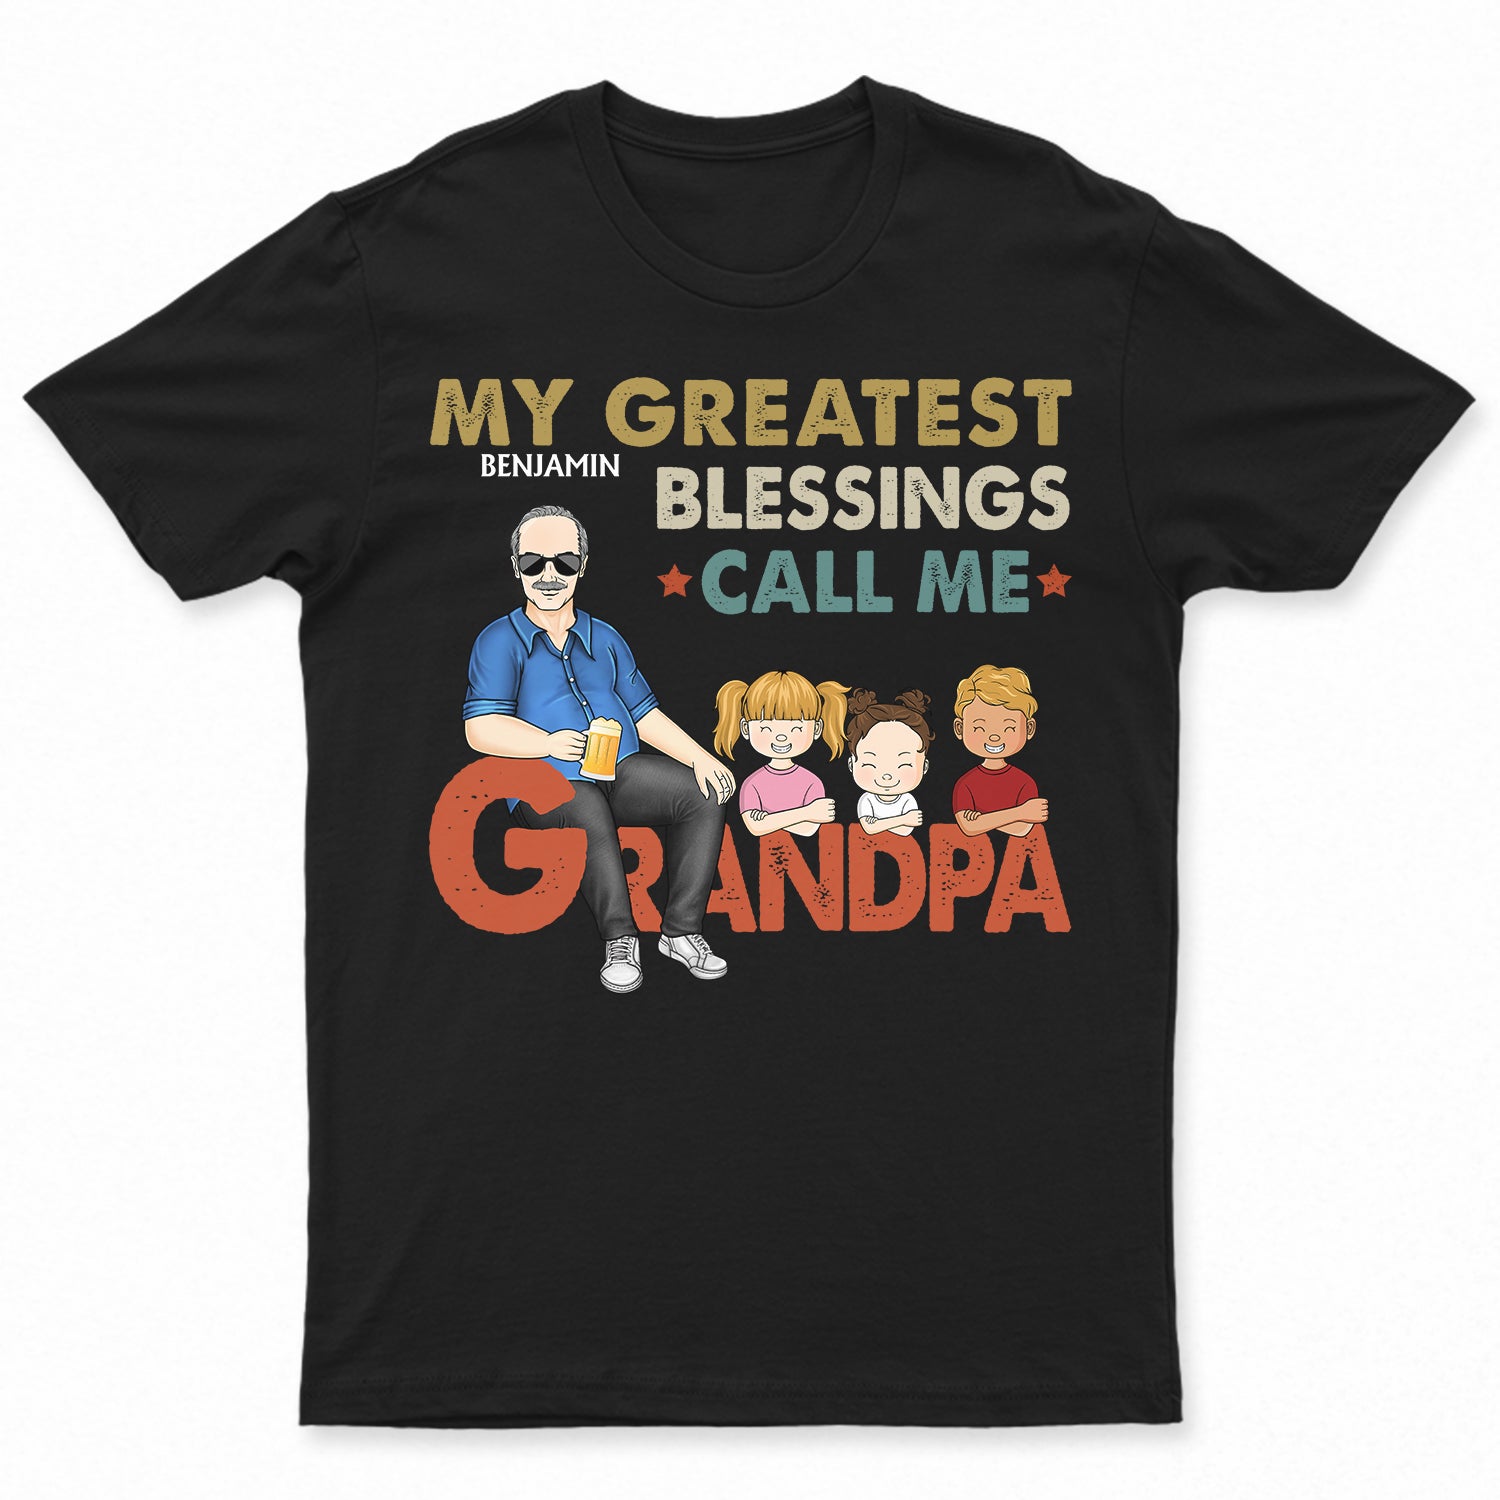 My Greatest Blessings Call Me - Gift For Dad, Father, Grandpa - Personalize Custom T Shirt